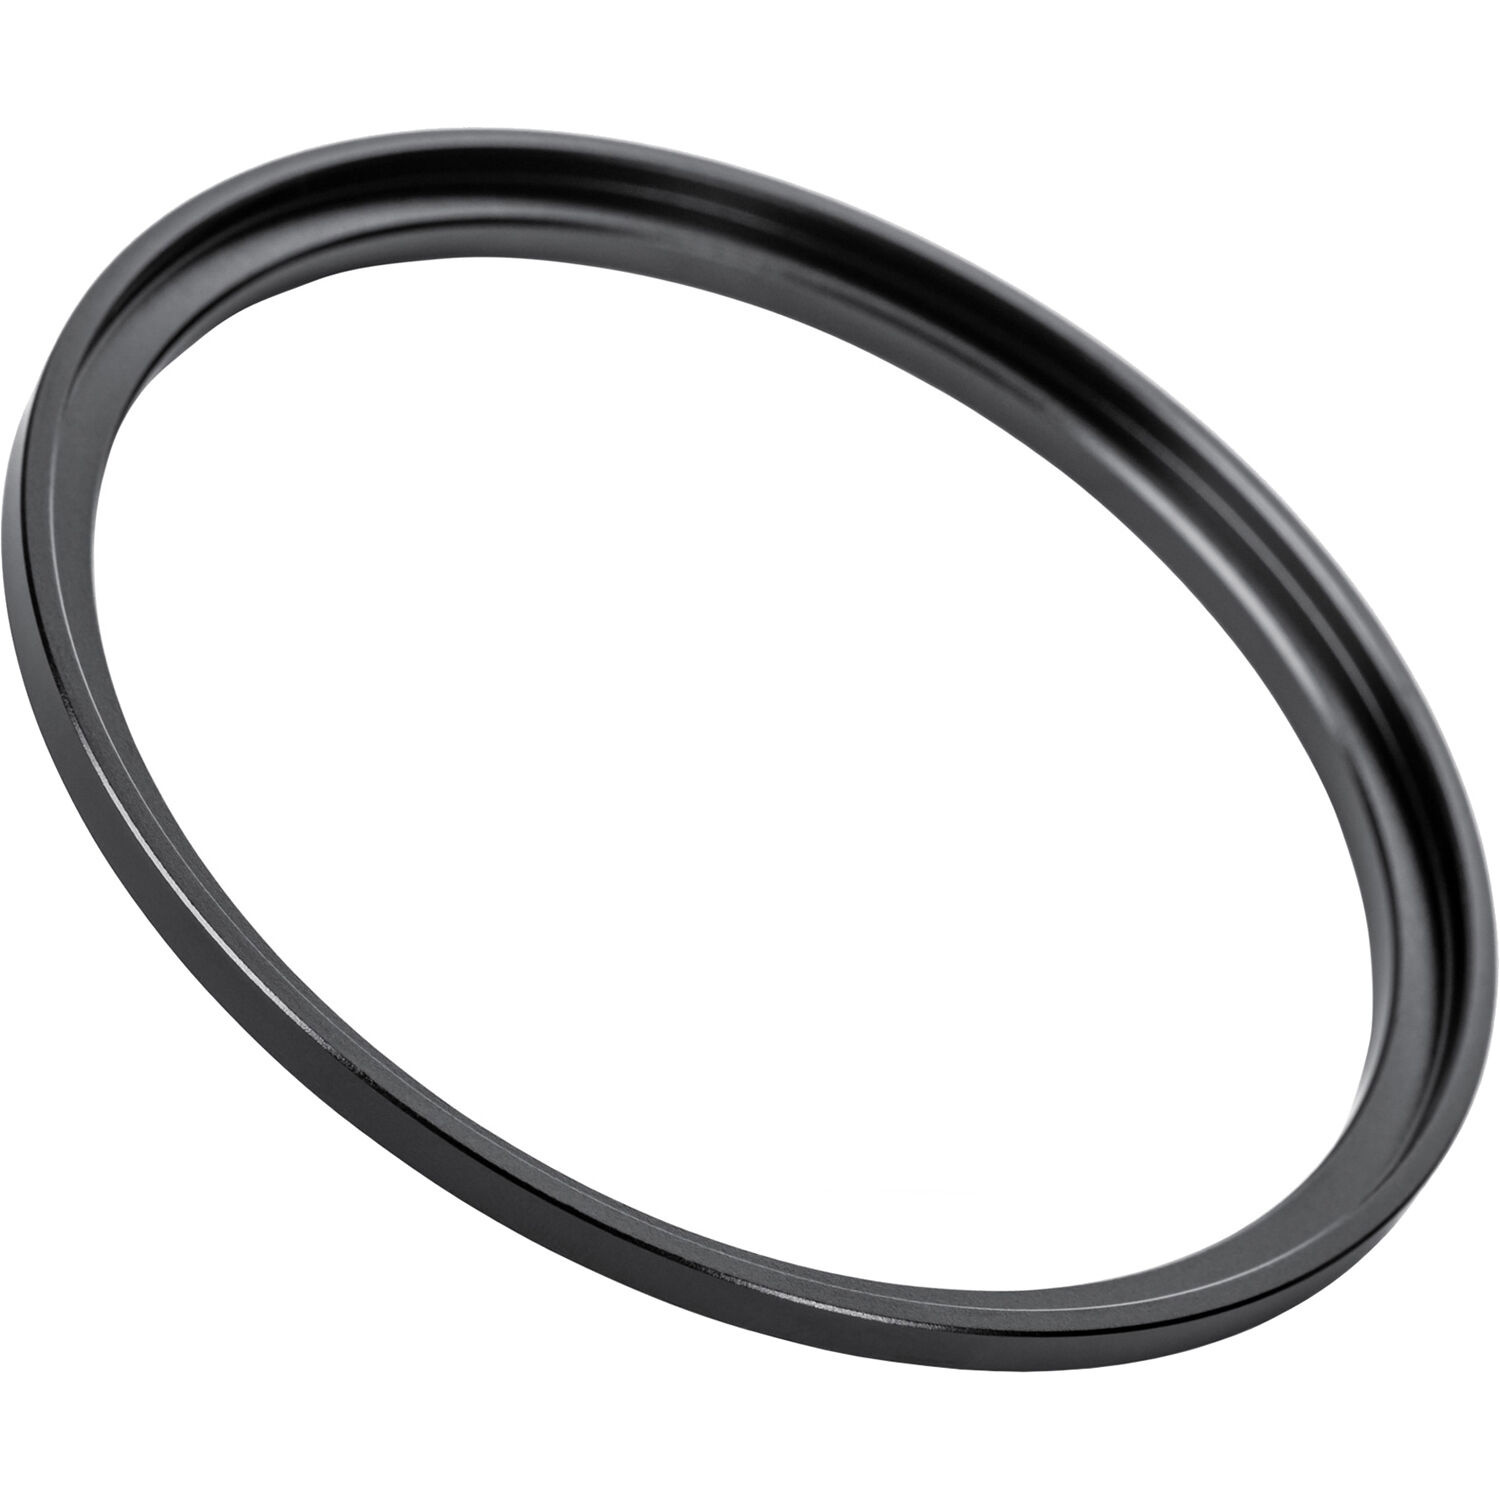 NiSi 67mm Adapter Ring for Swift System Filters